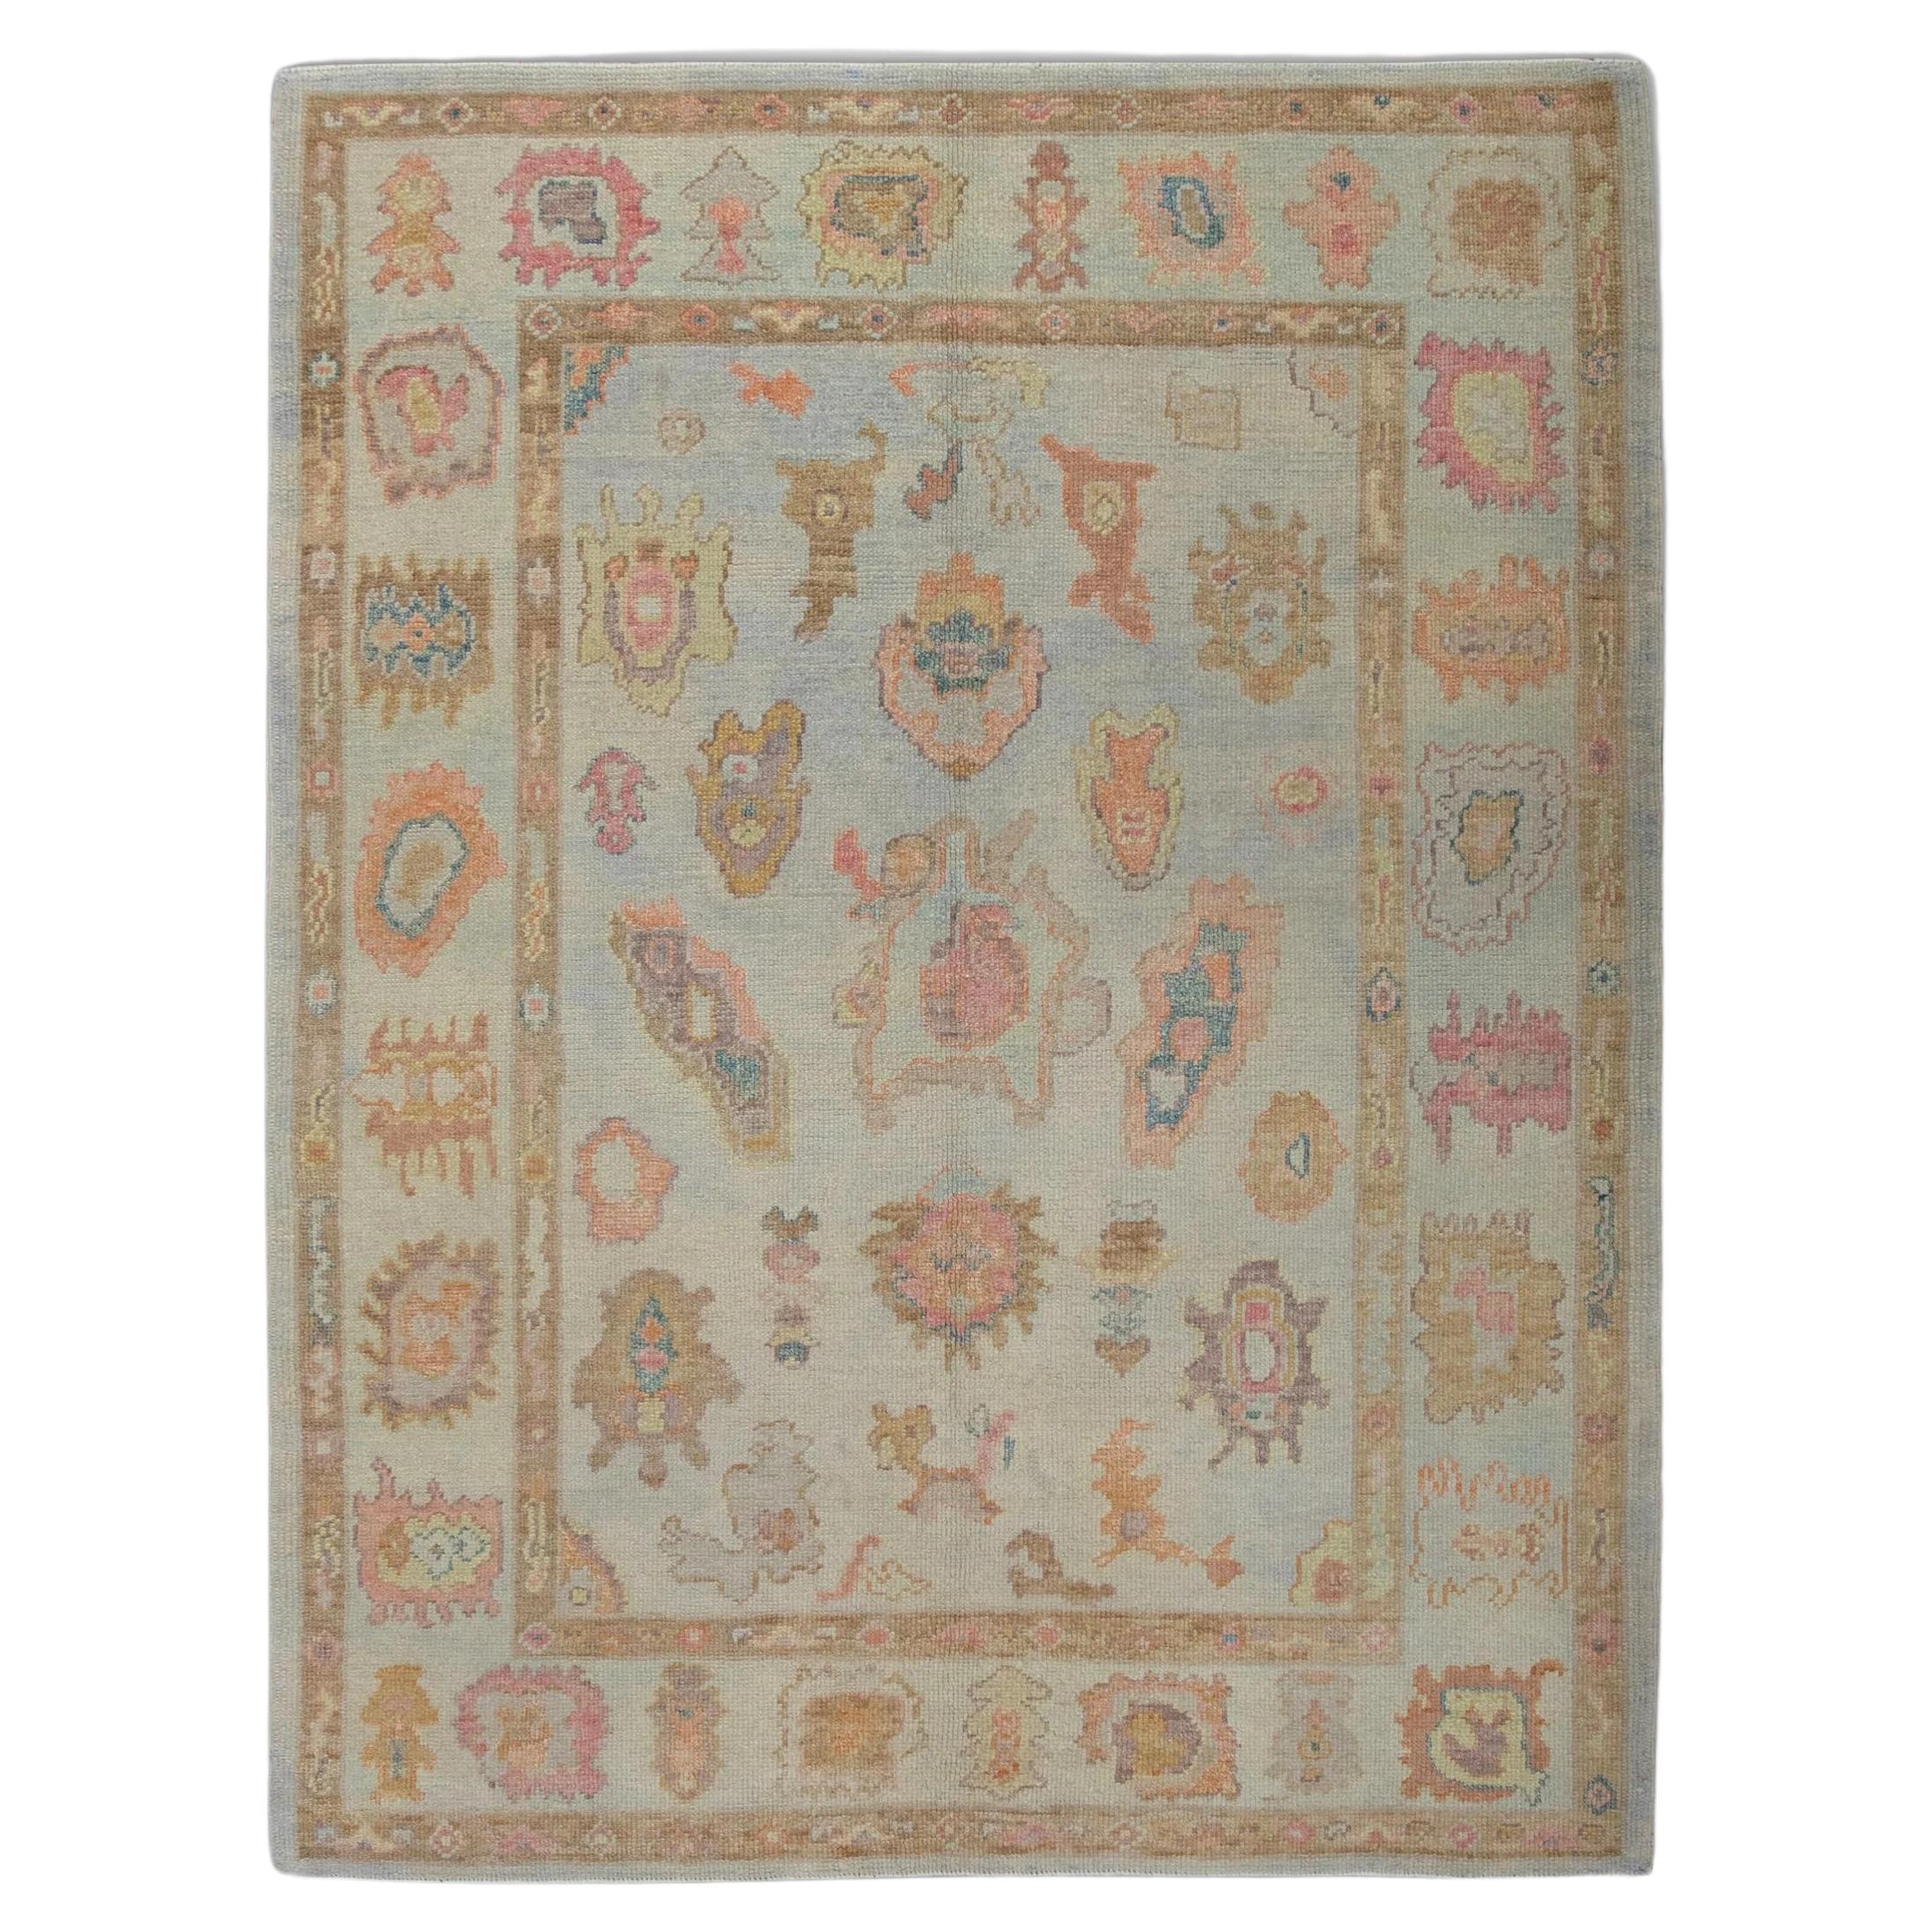 Blue Handwoven Wool Turkish Oushak Rug with Multicolor Floral Pattern 4'11 x 6'7